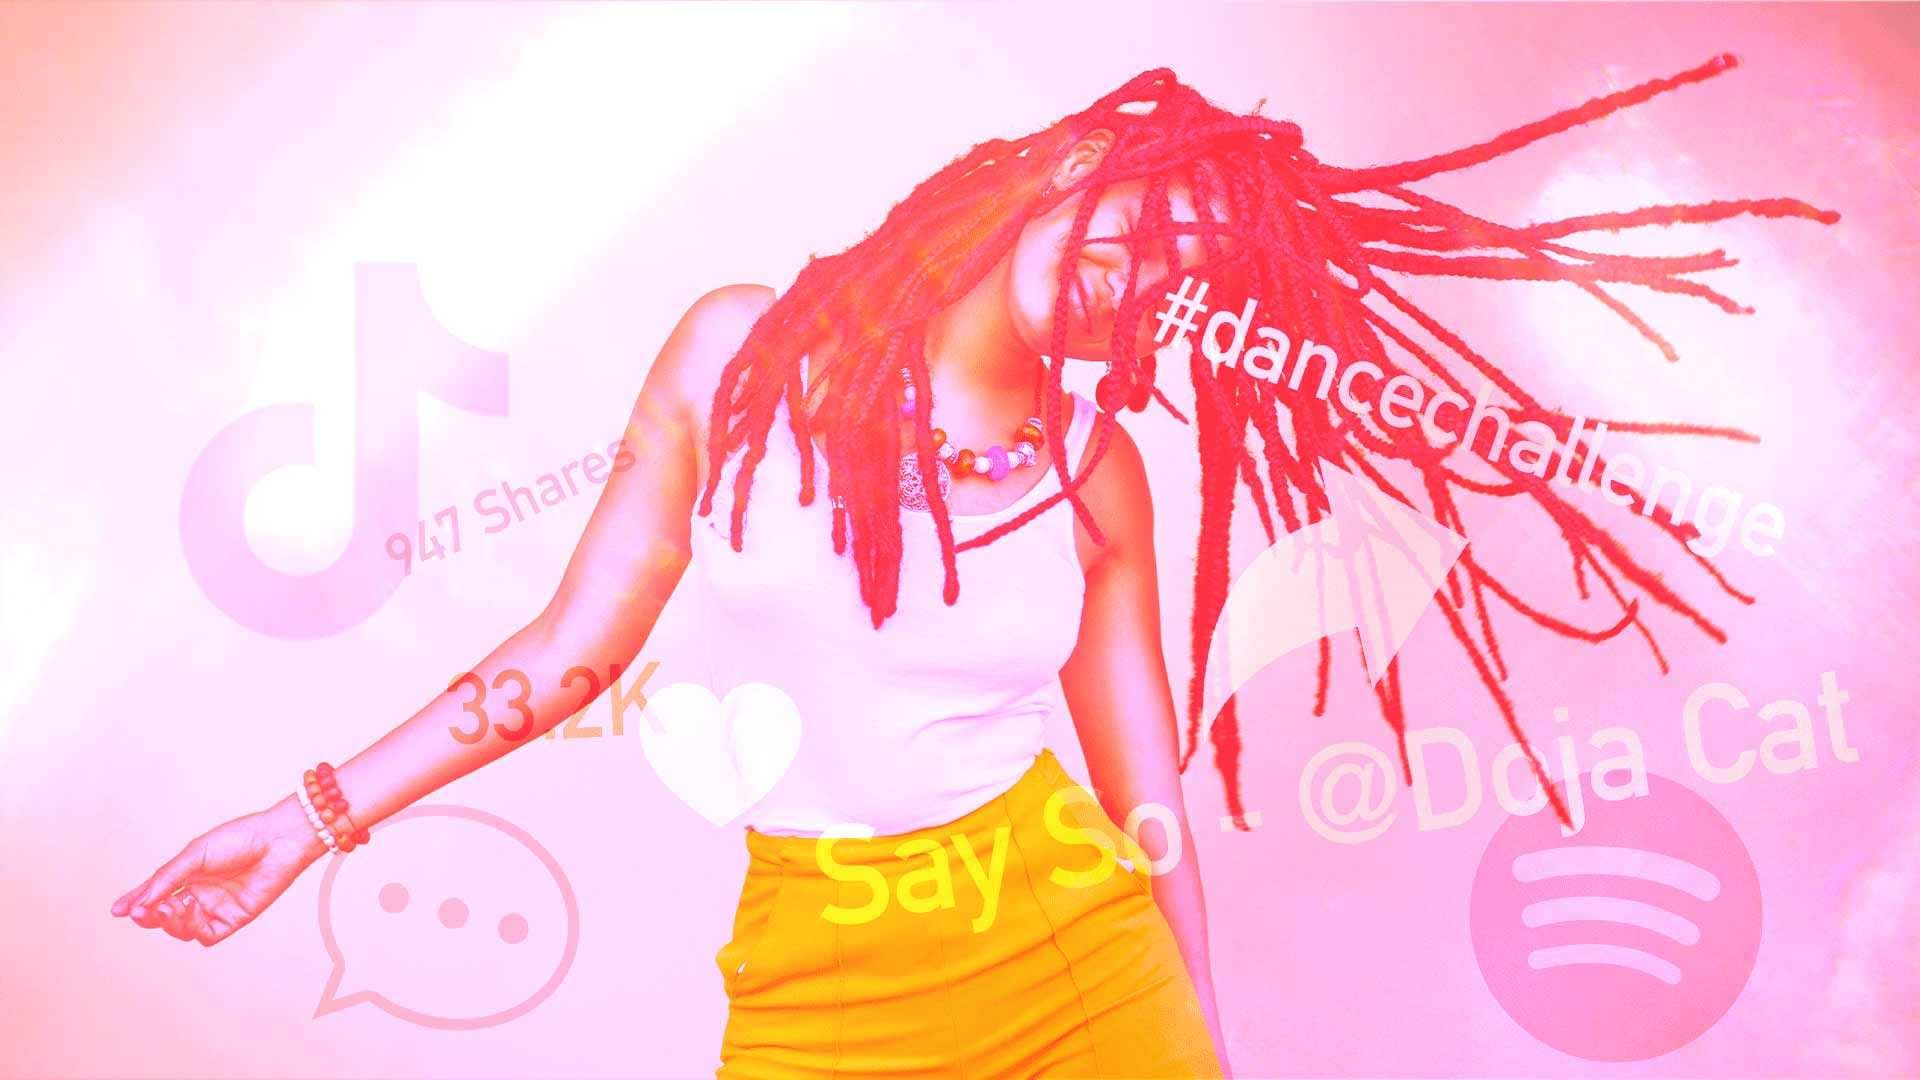 woman dancing with TikTok symbols and hashtags in the background